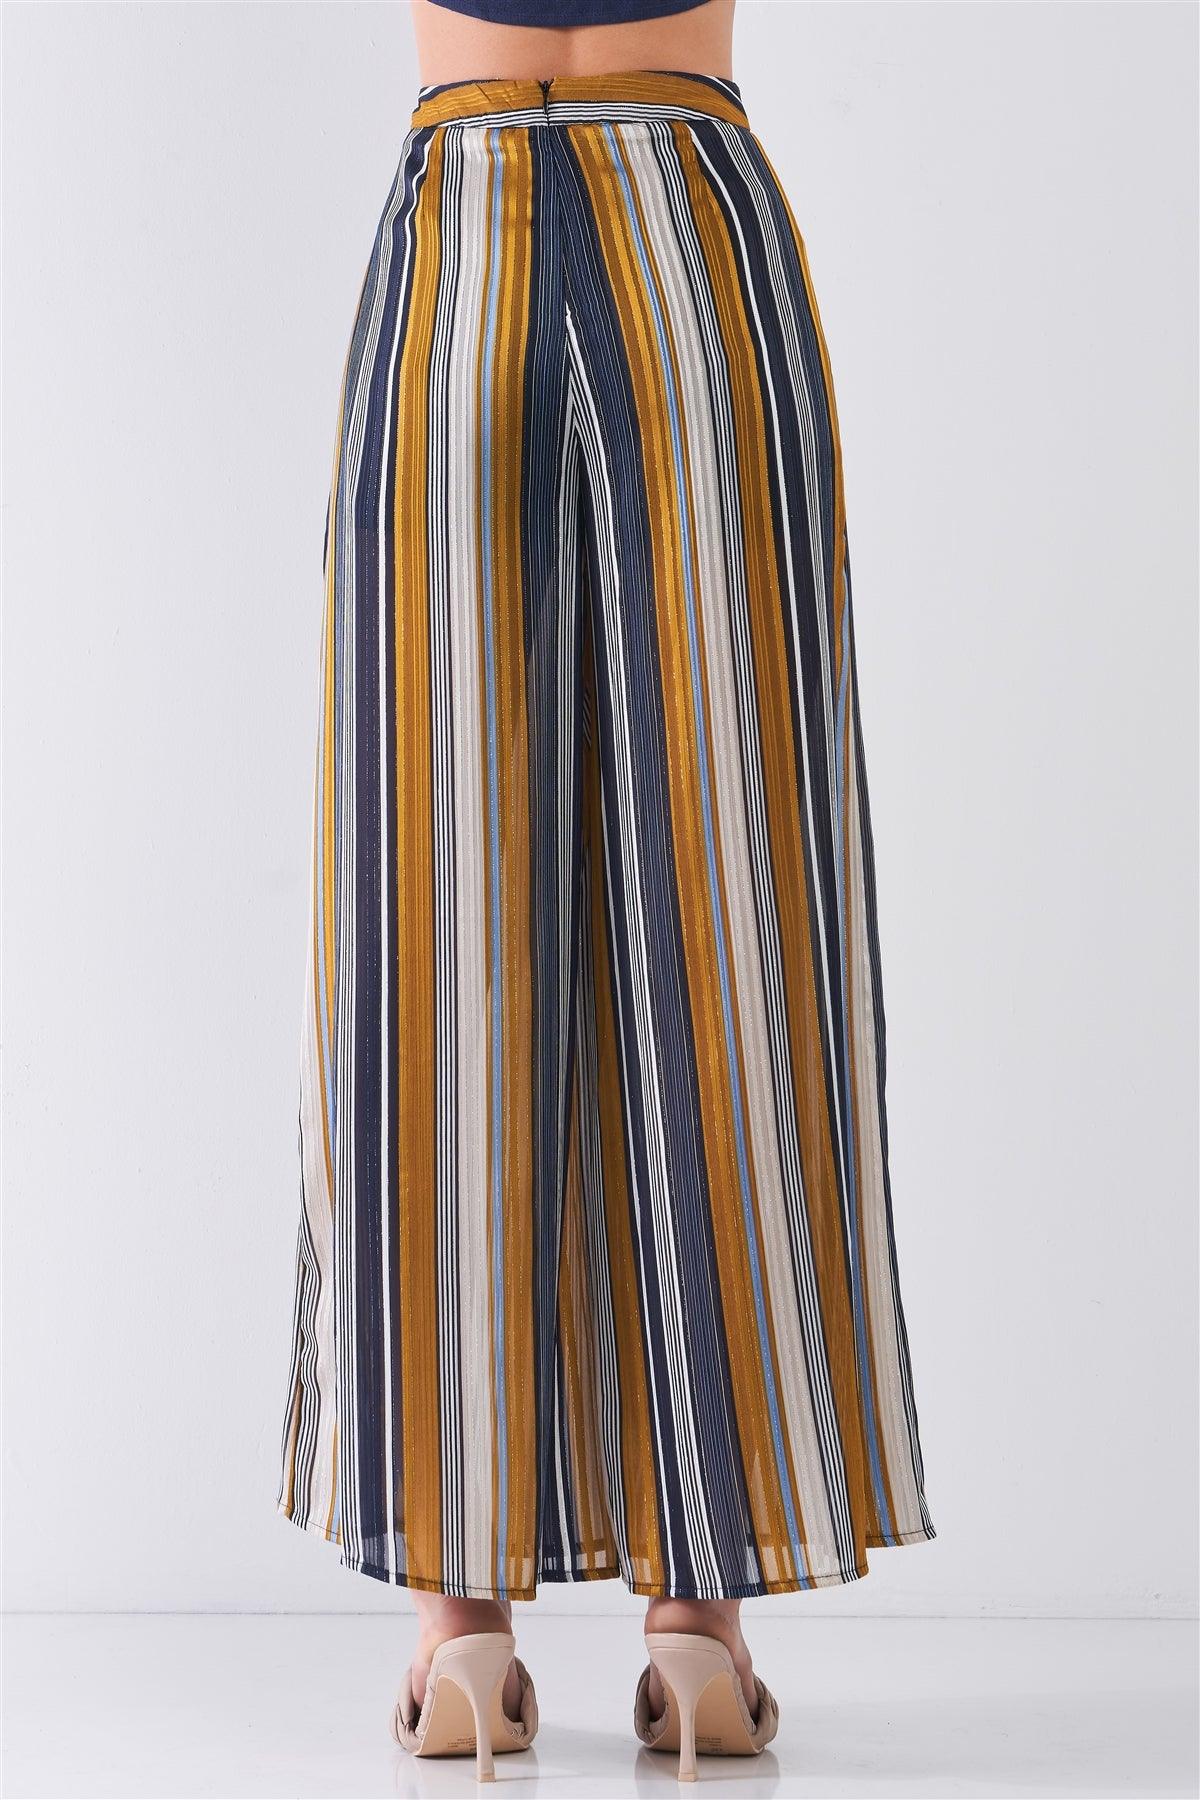 Navy Multicolor Striped Glitter Stitching High Waist Thigh-High Side Slit Detail Wide Leg Pants /3-2-1